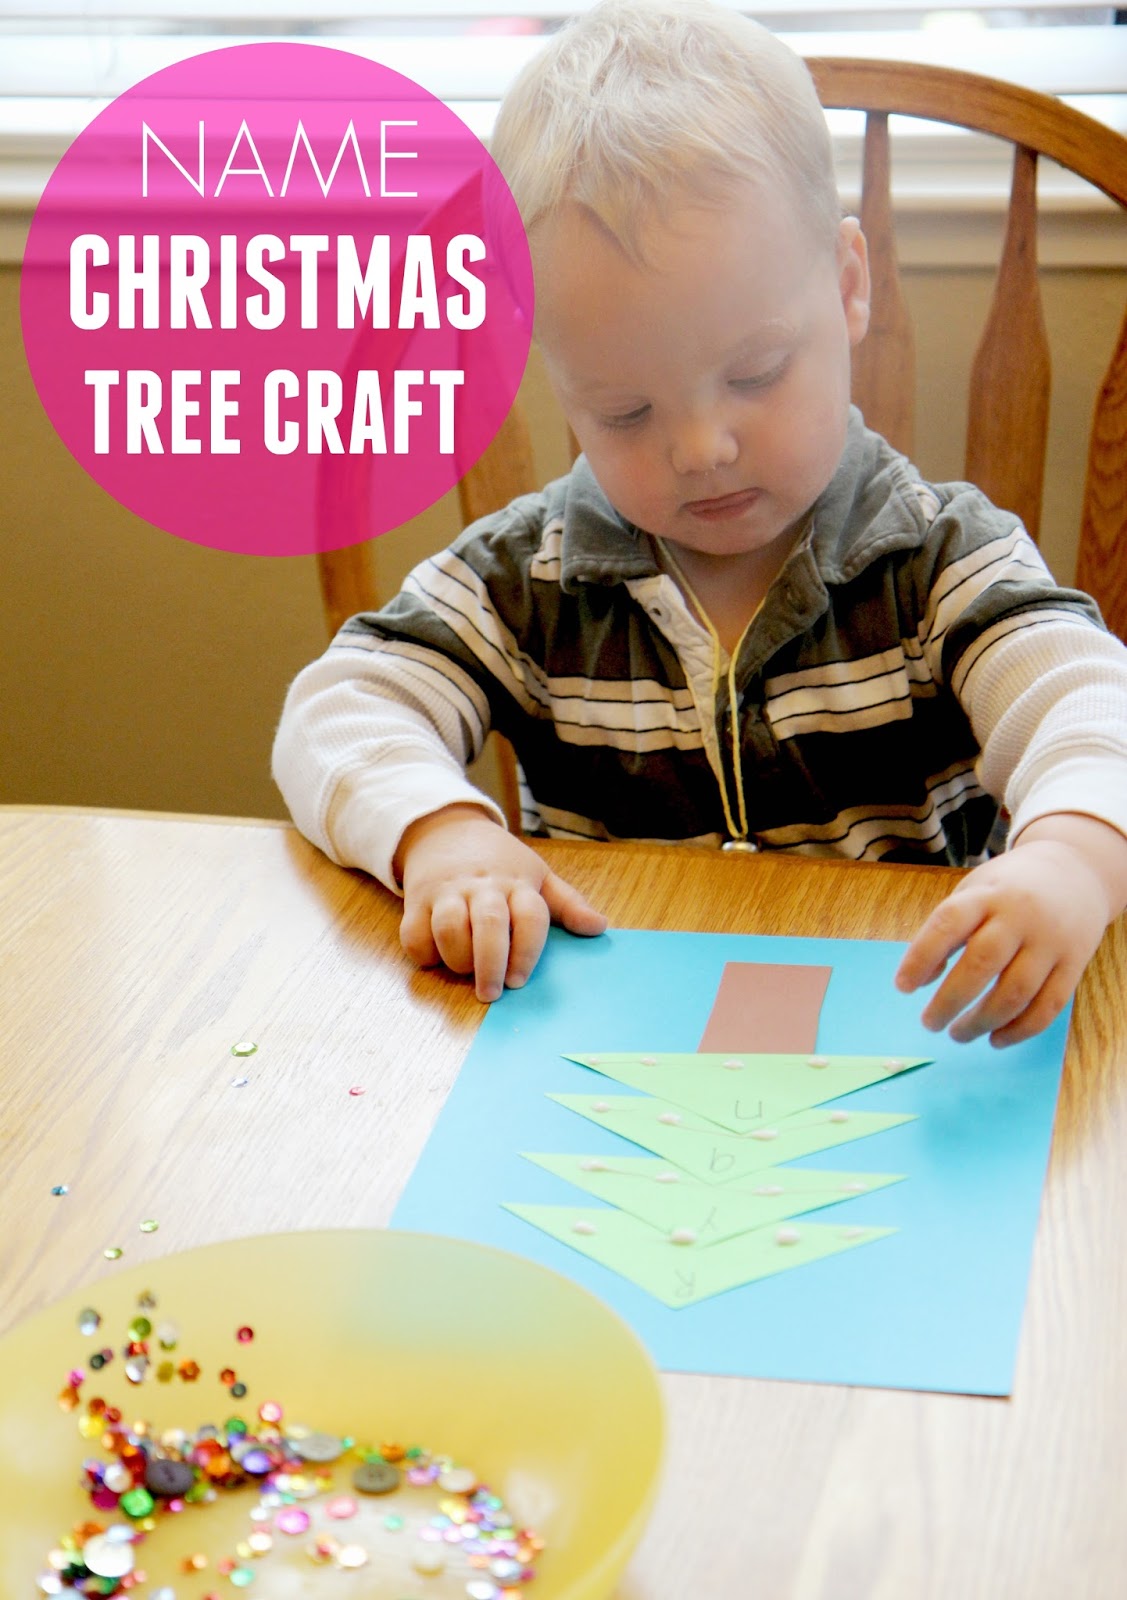 Toddler Approved!: Sparkly Name Christmas Tree Craft for Kids